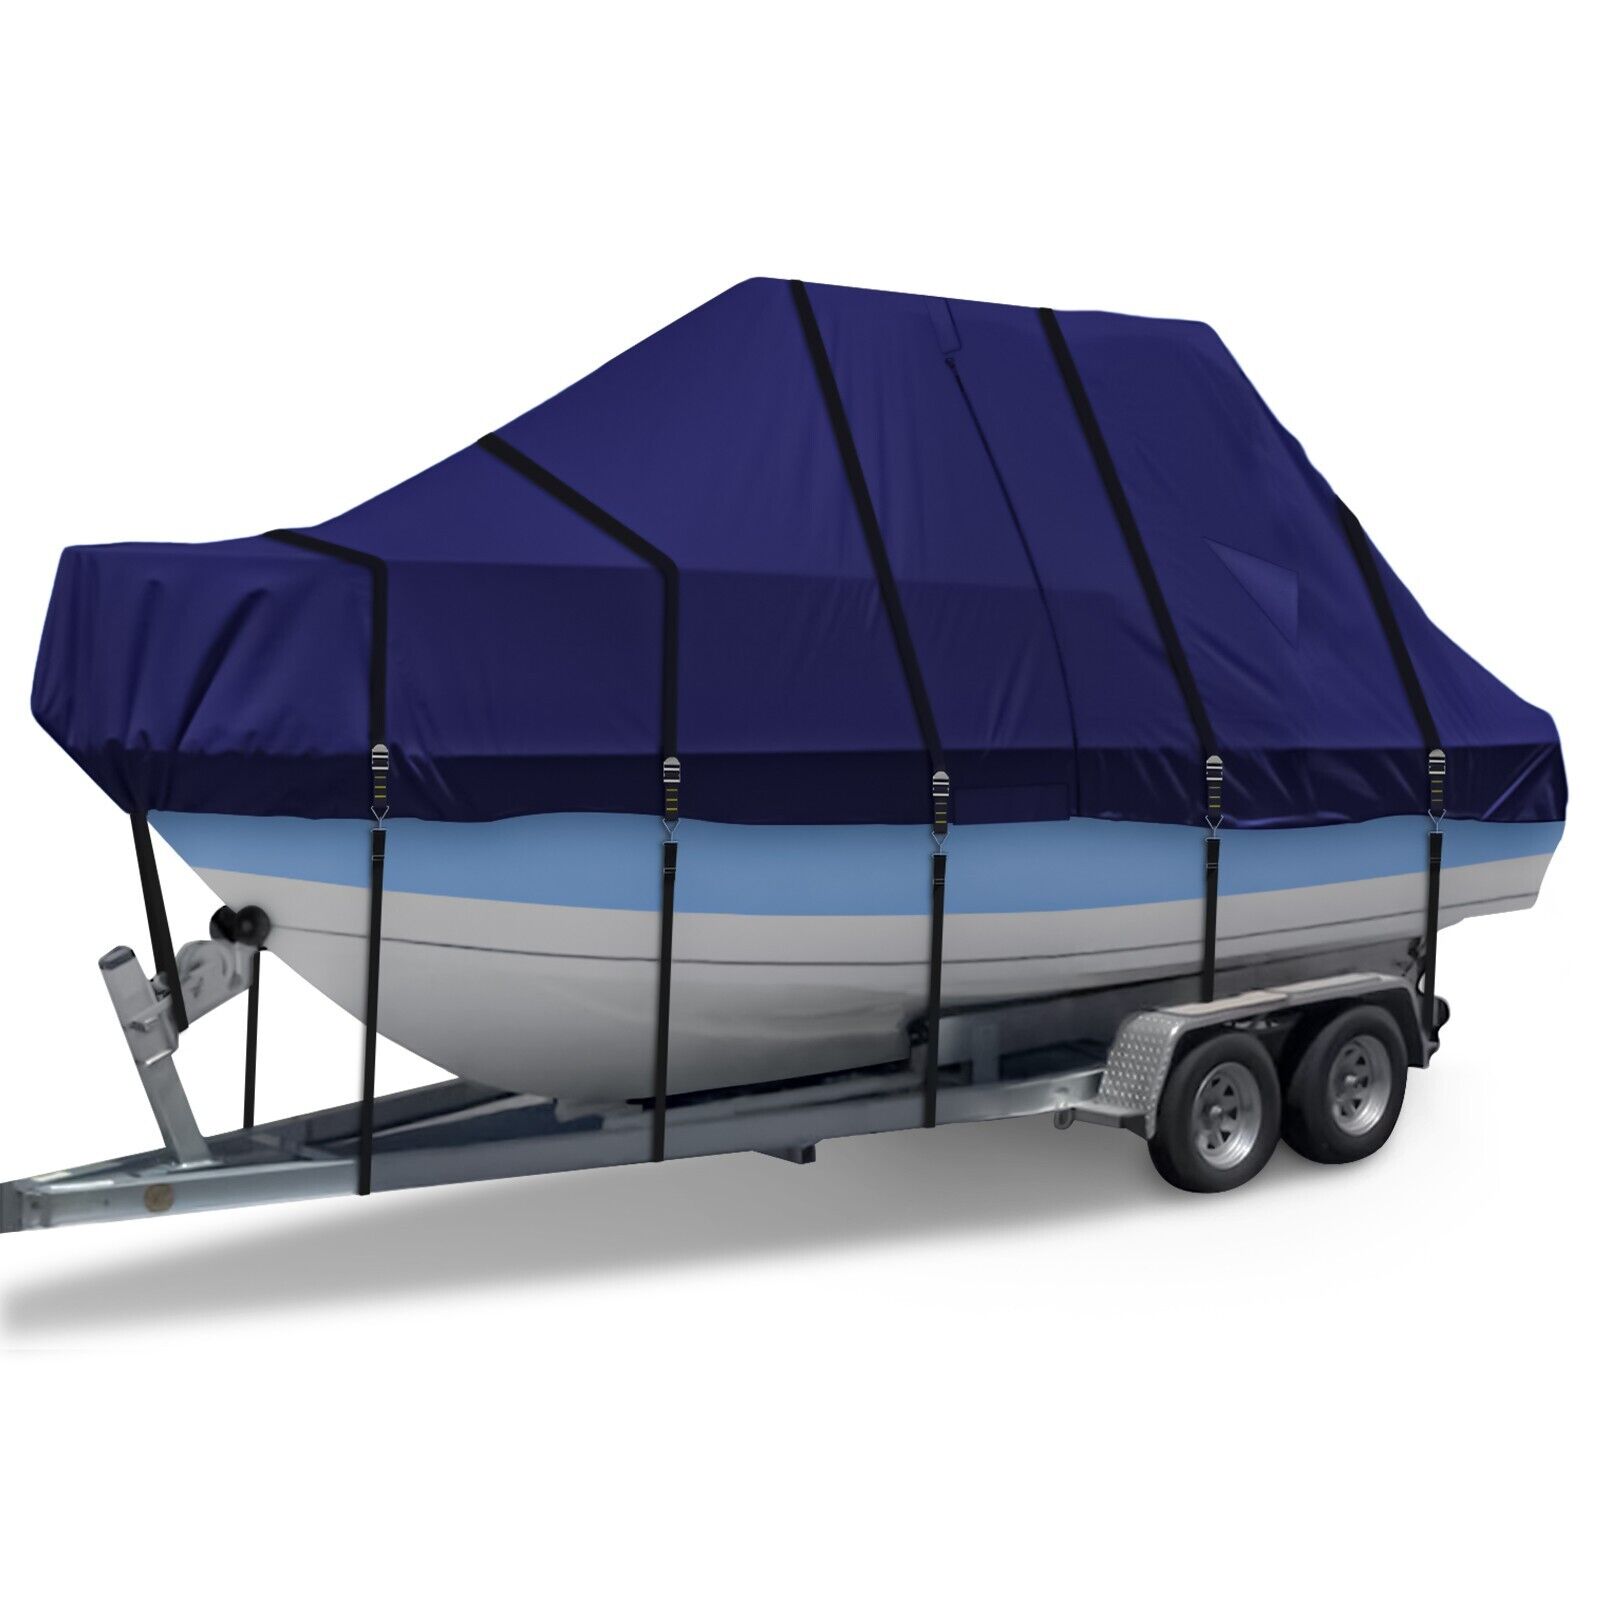 900D Trailerable T Top Boat Cover, Waterproof Center Console Boat Cover, Navy